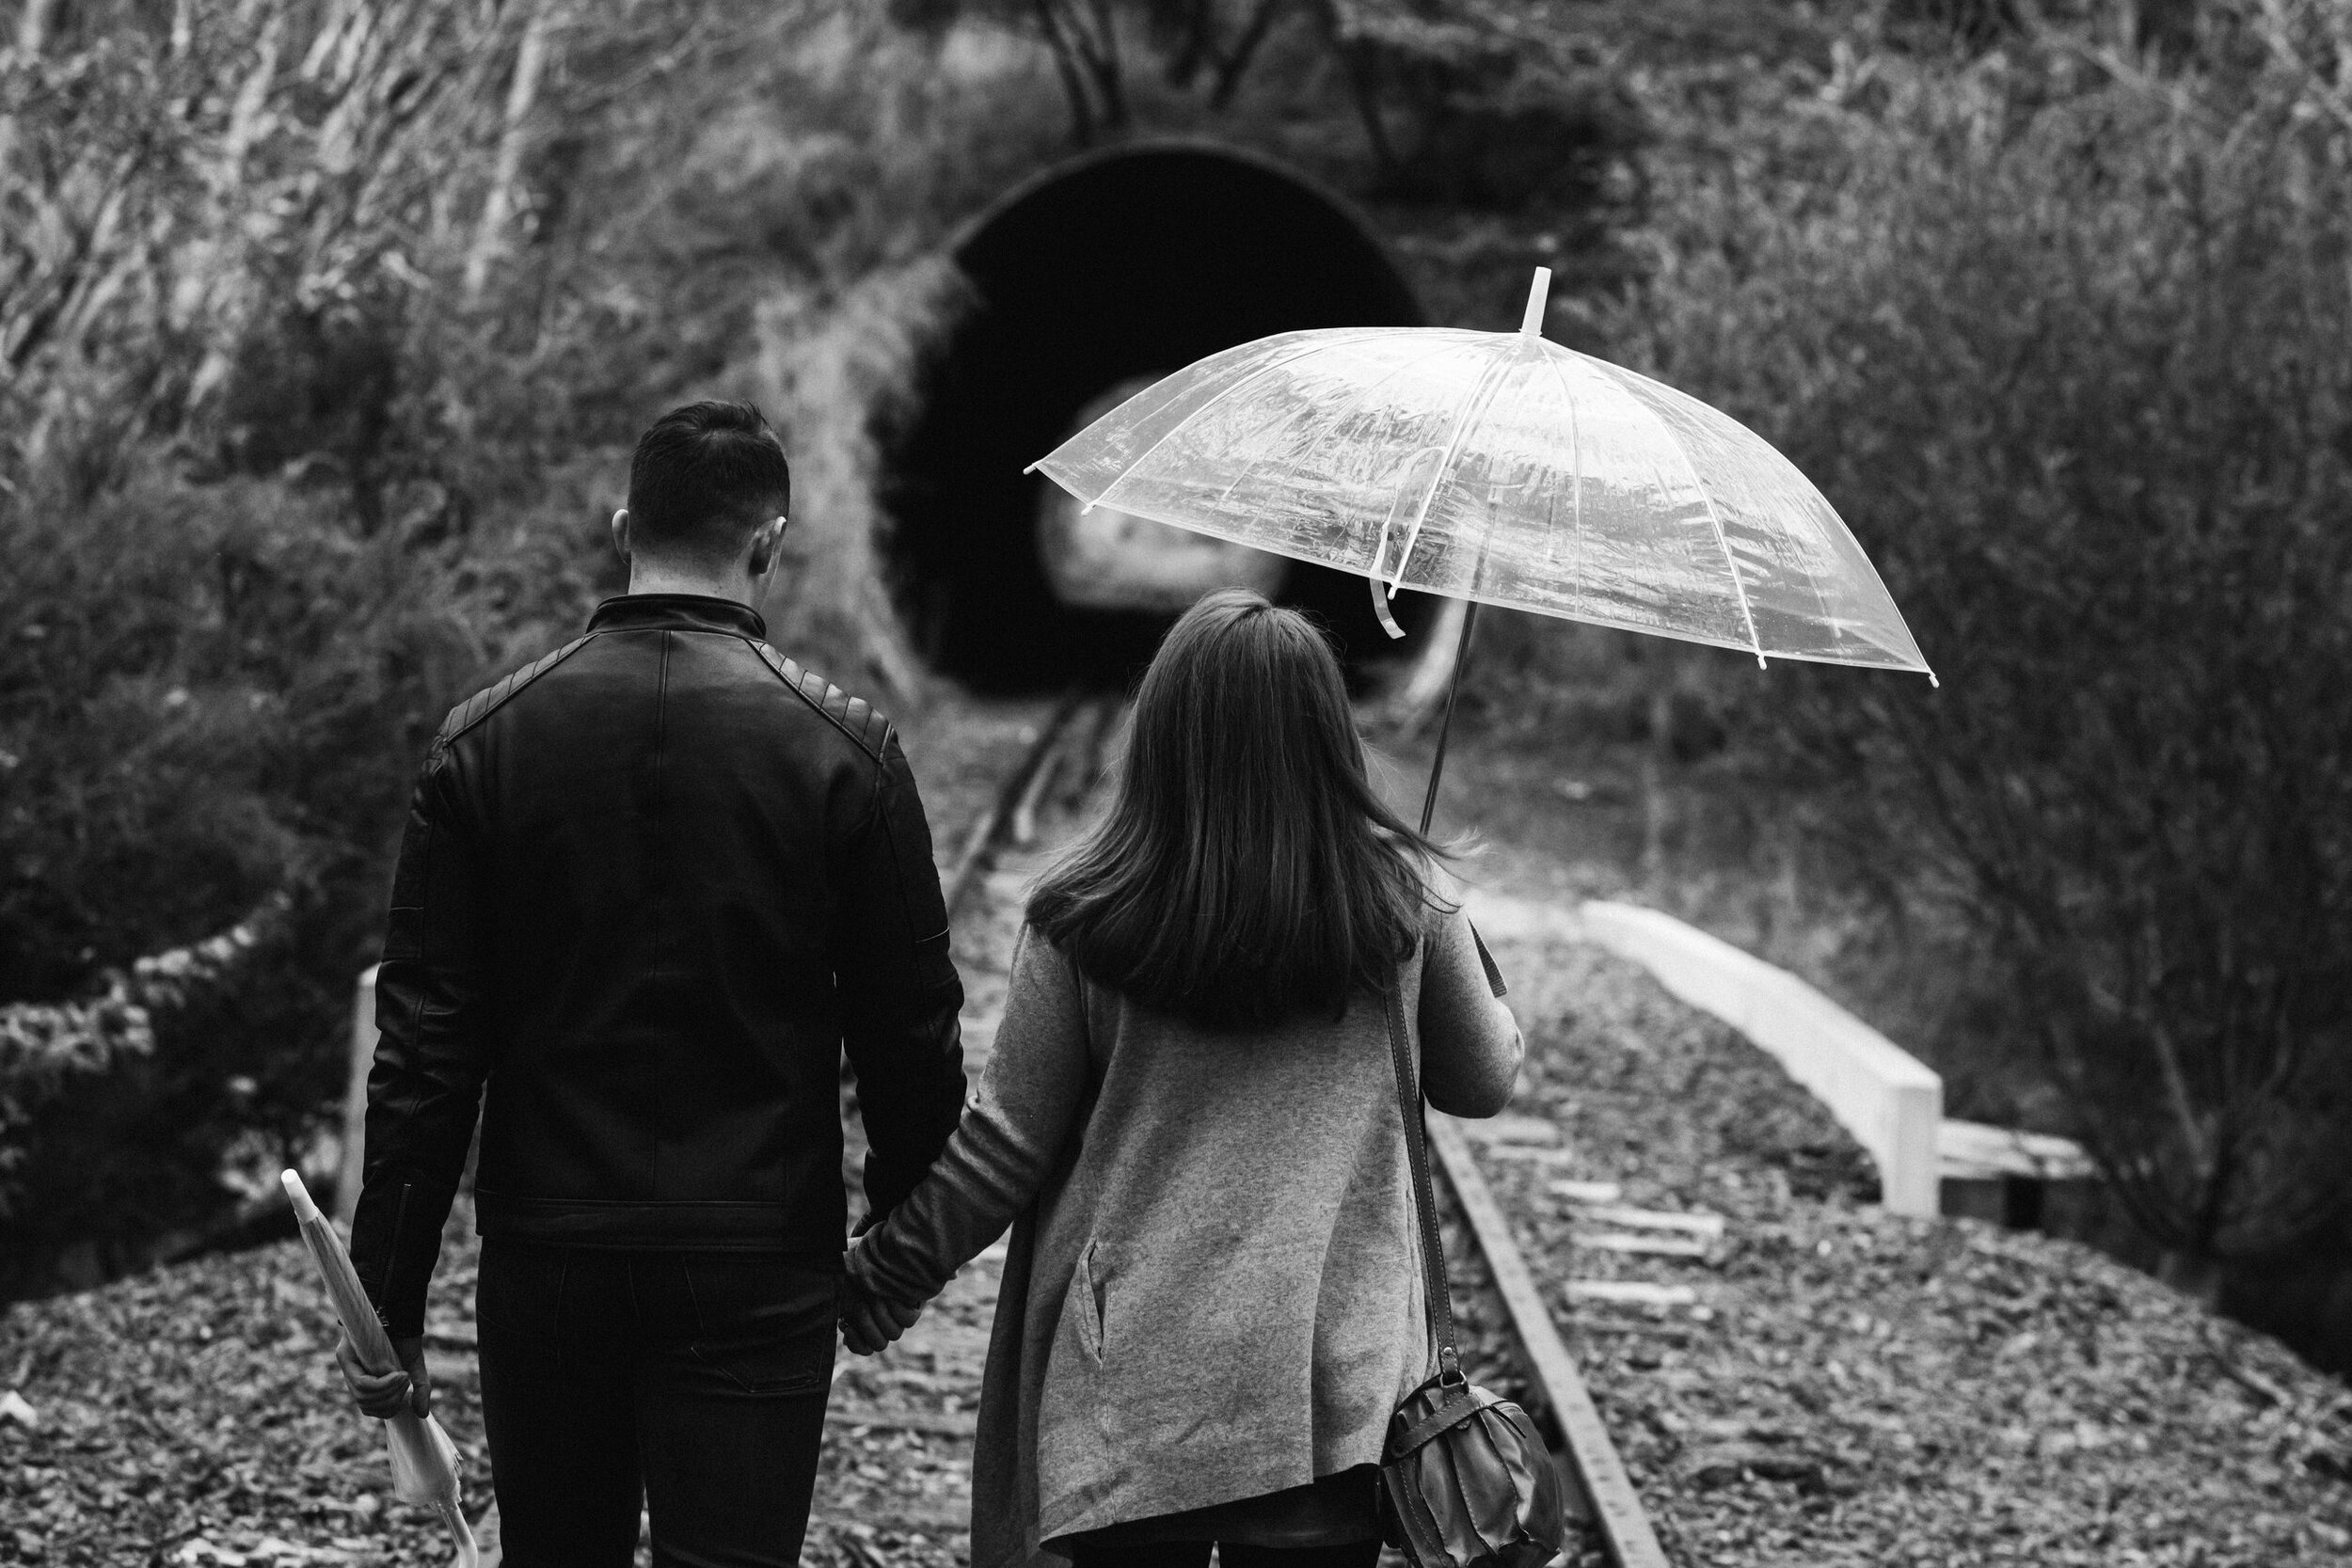 Wintery Autumn Adelaide Hills Engagement Session 02.JPG